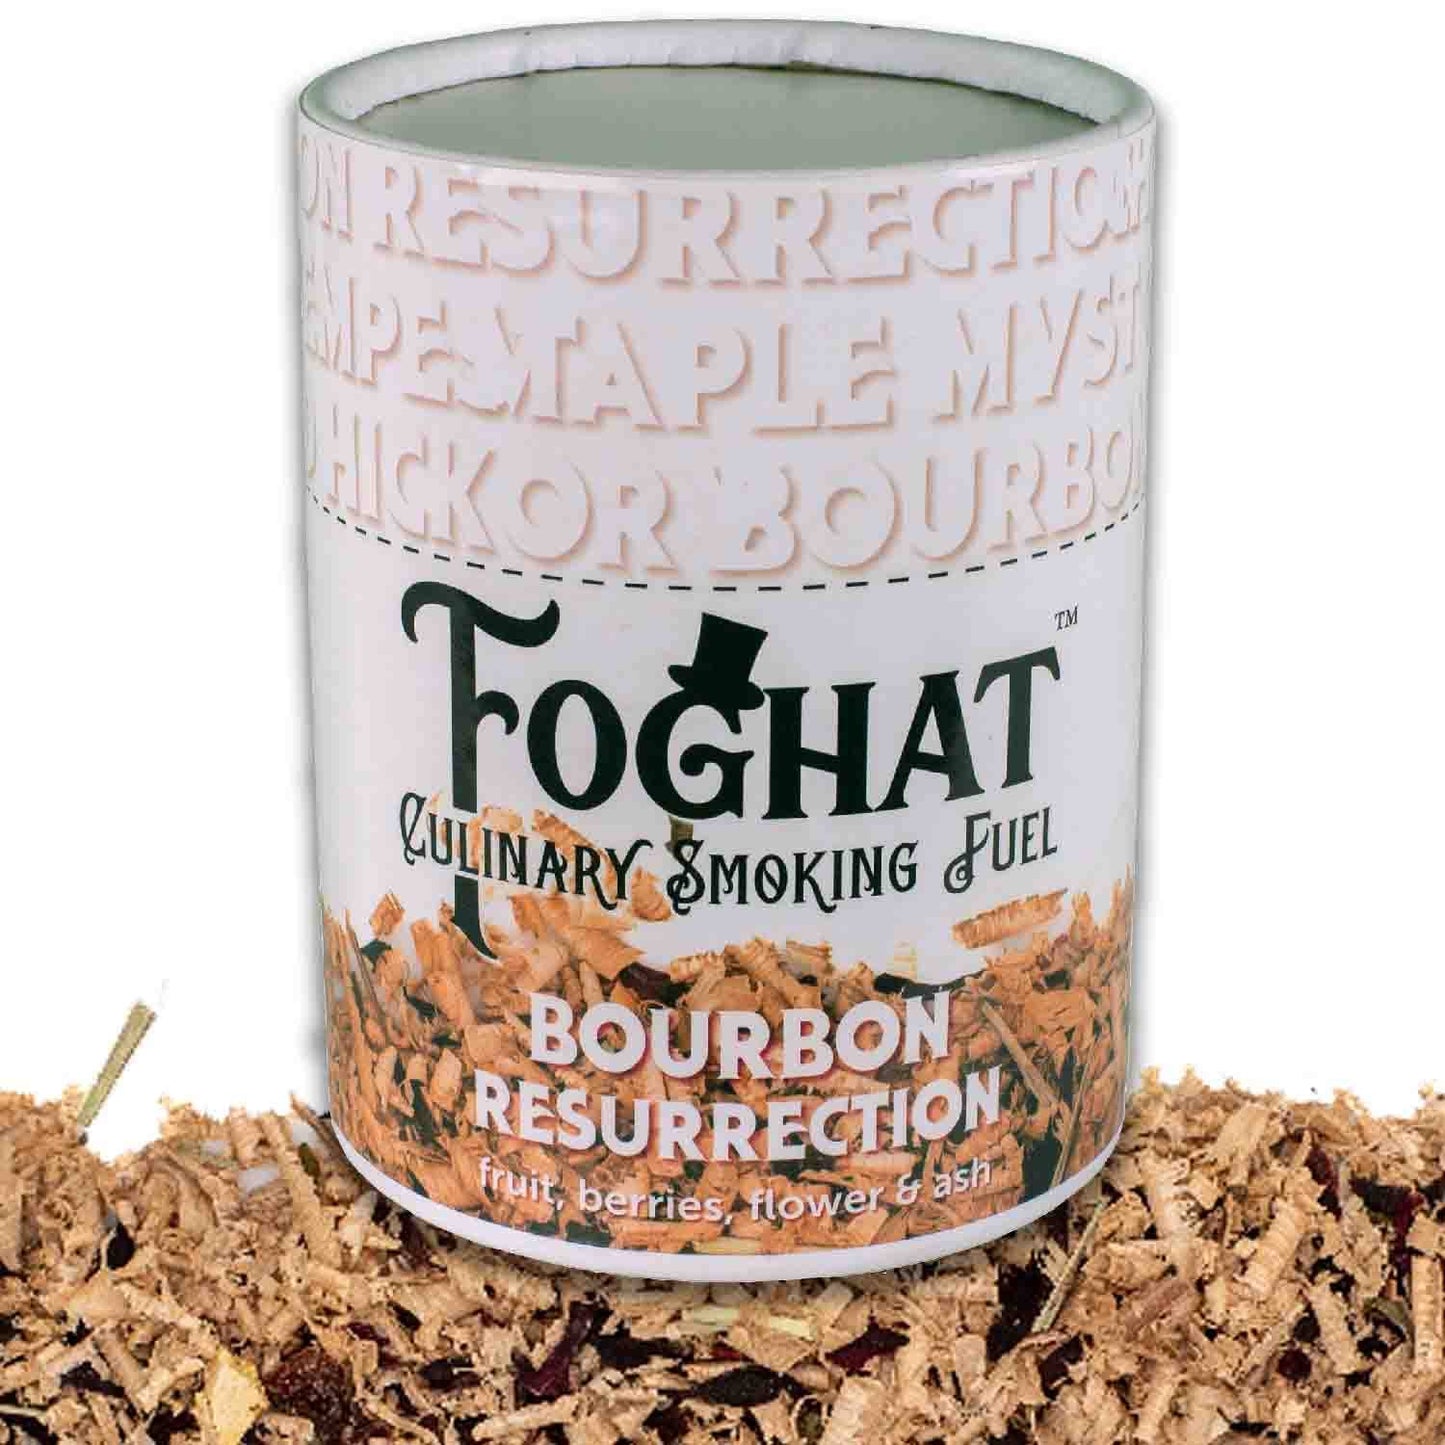 Bourbon Resurrection - Foghat Culinary Smoking Fuel - The Tool Store